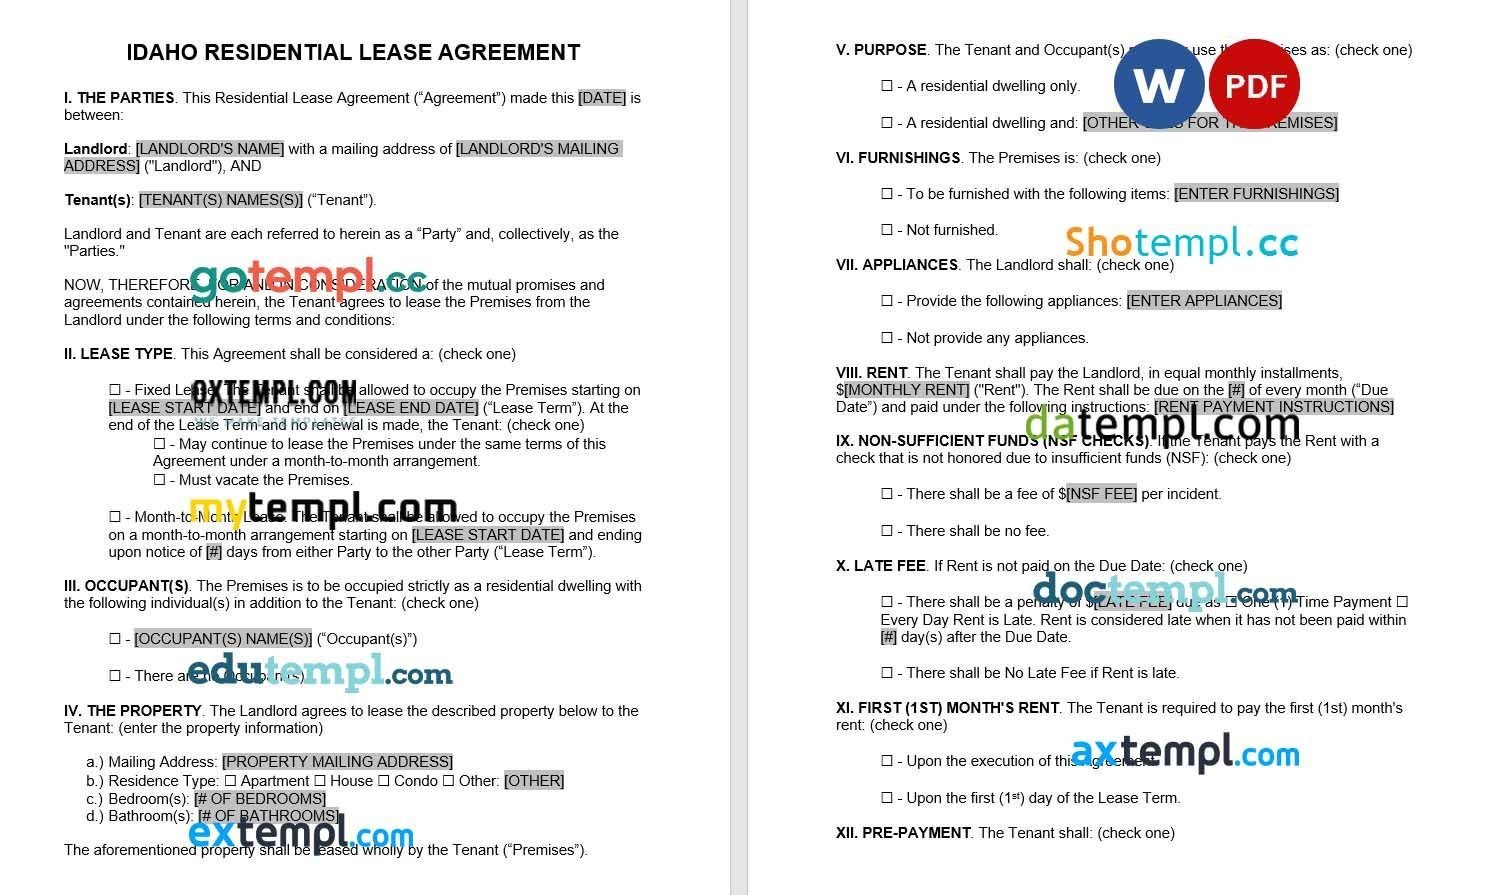 Idaho Residential Lease Agreement Word example, fully editable